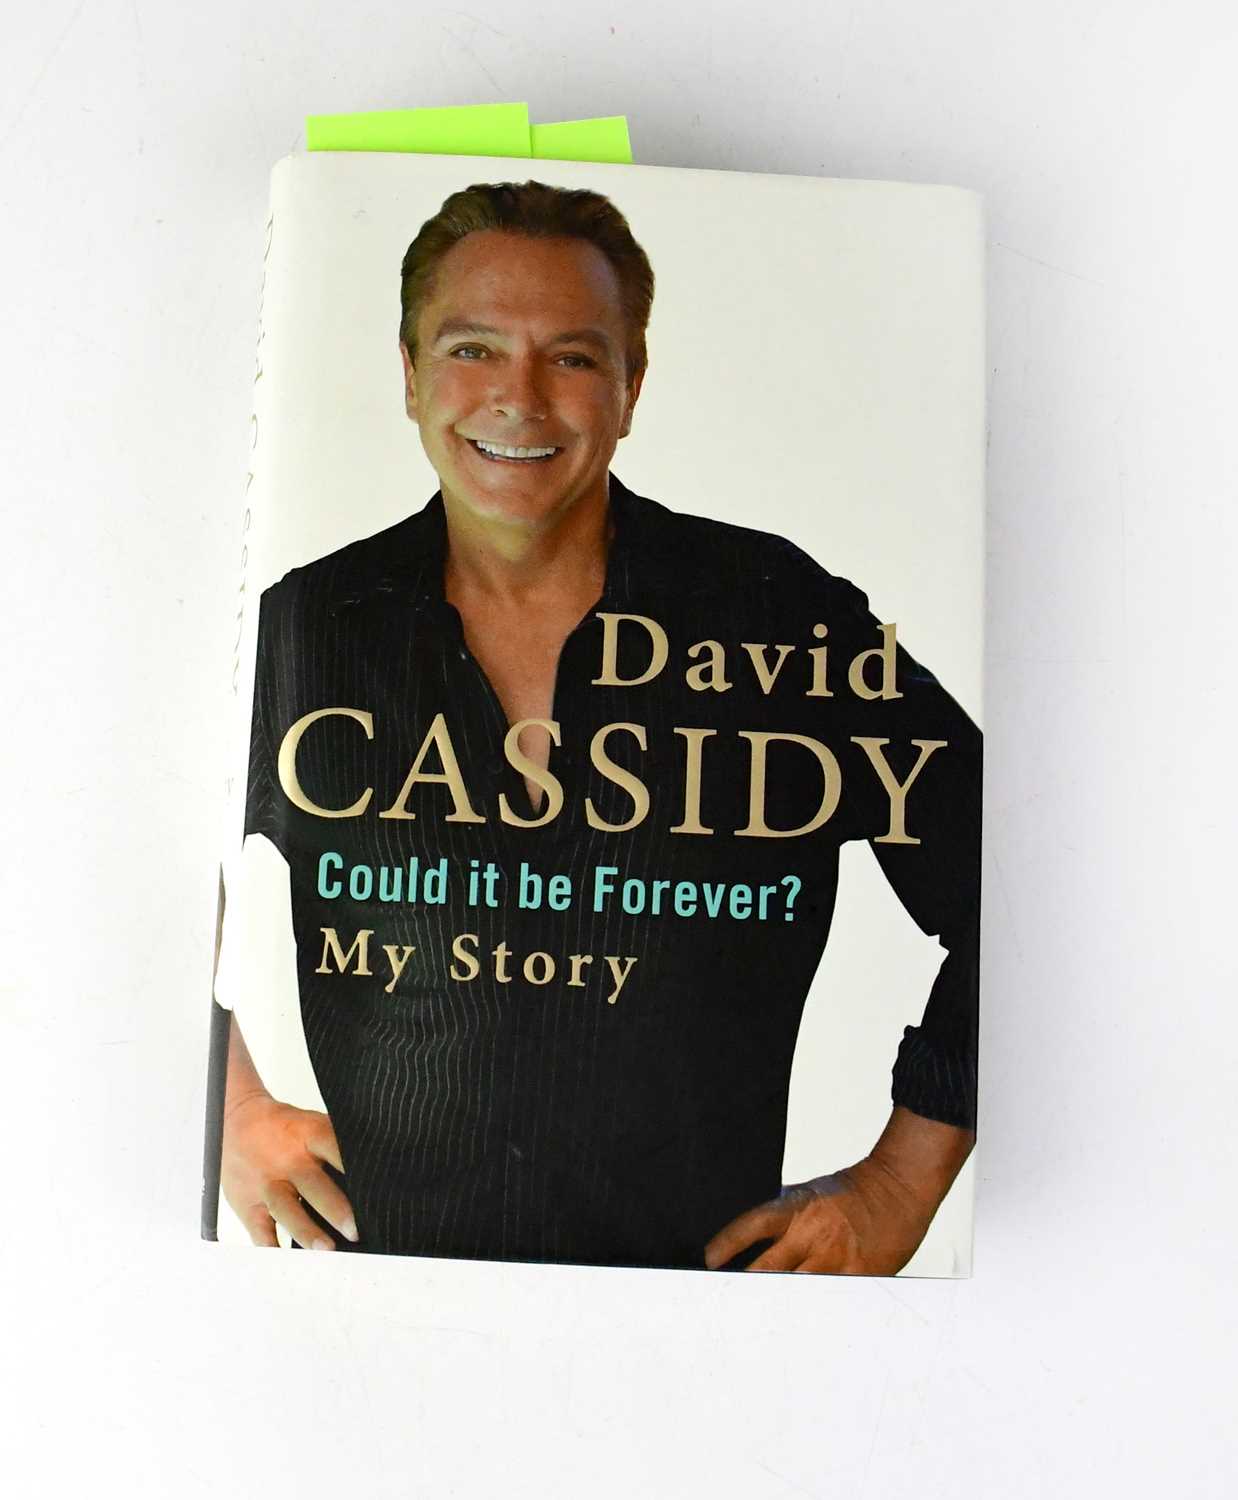 Lot 514 David Cassidy Could It Be Forever My